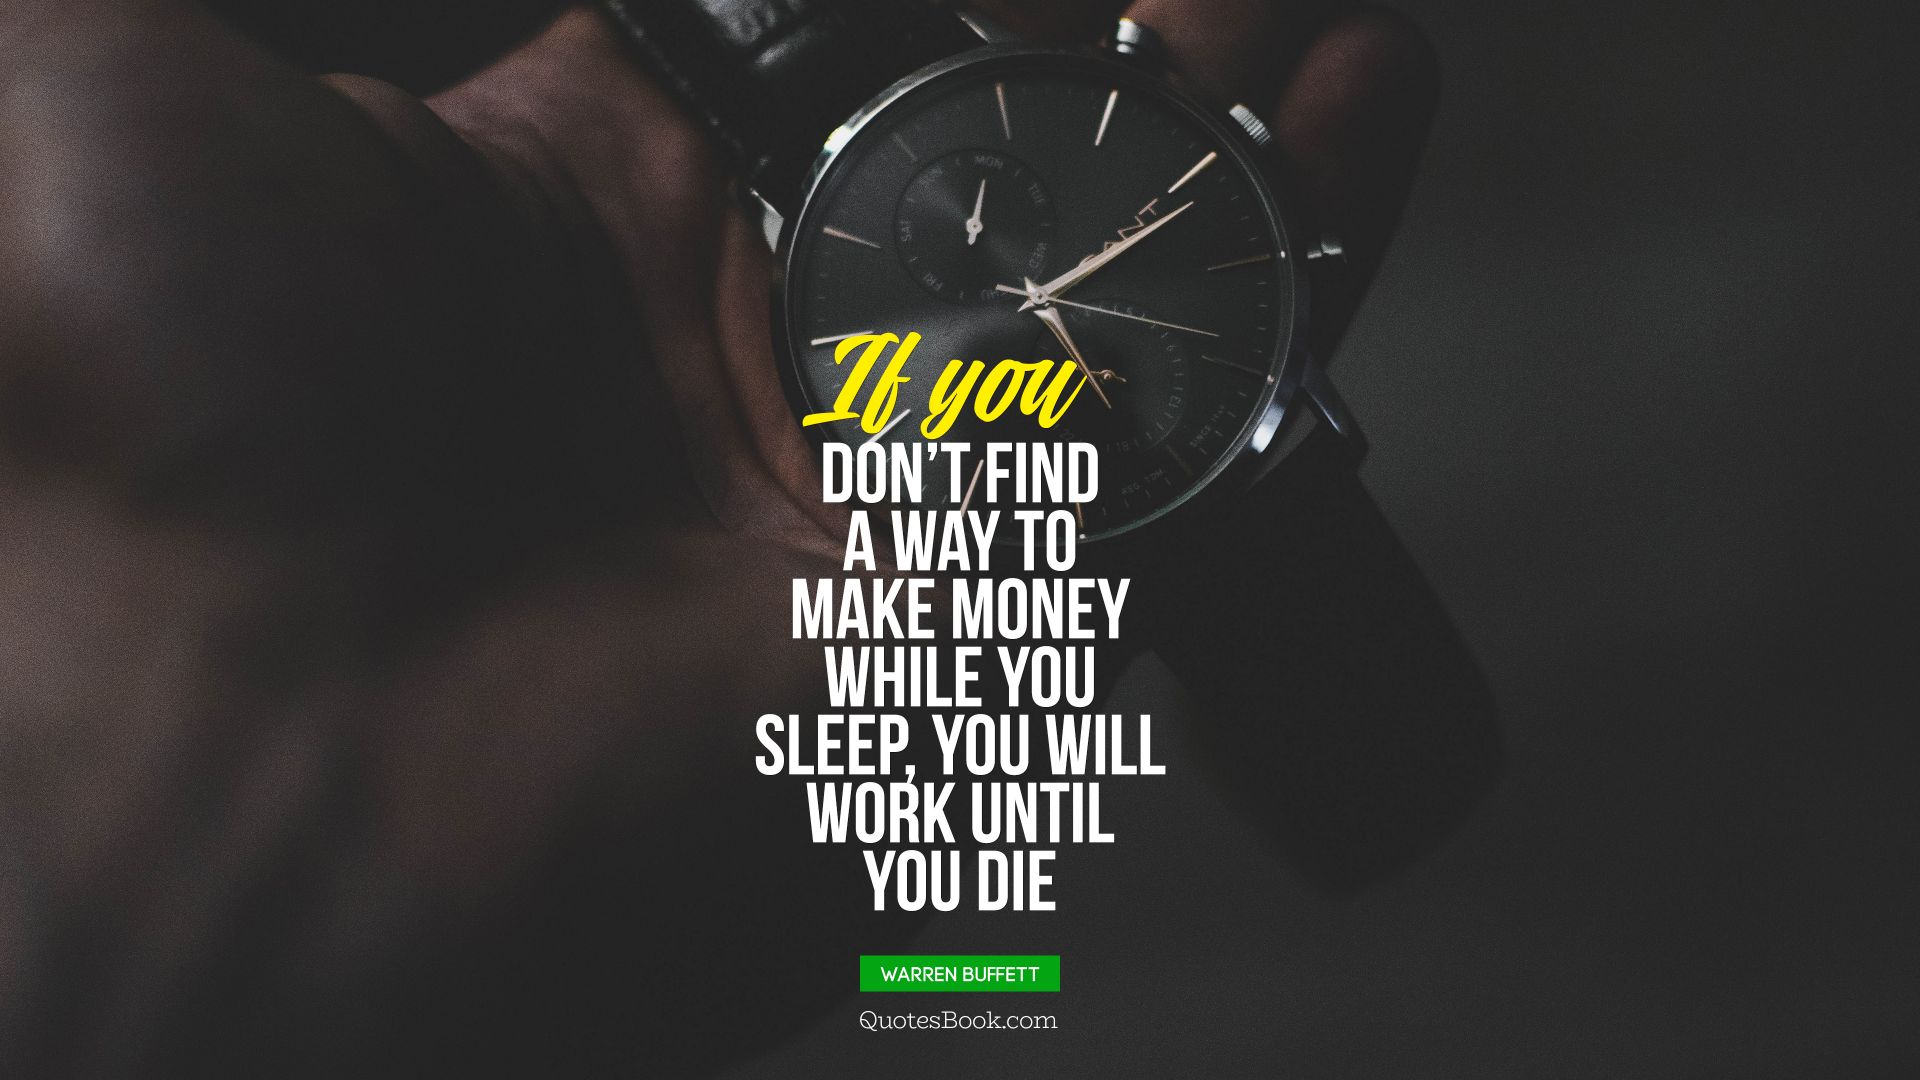 If you don’t find a way to make money while you sleep, you will work until you die. - Quote by Warren Buffett 